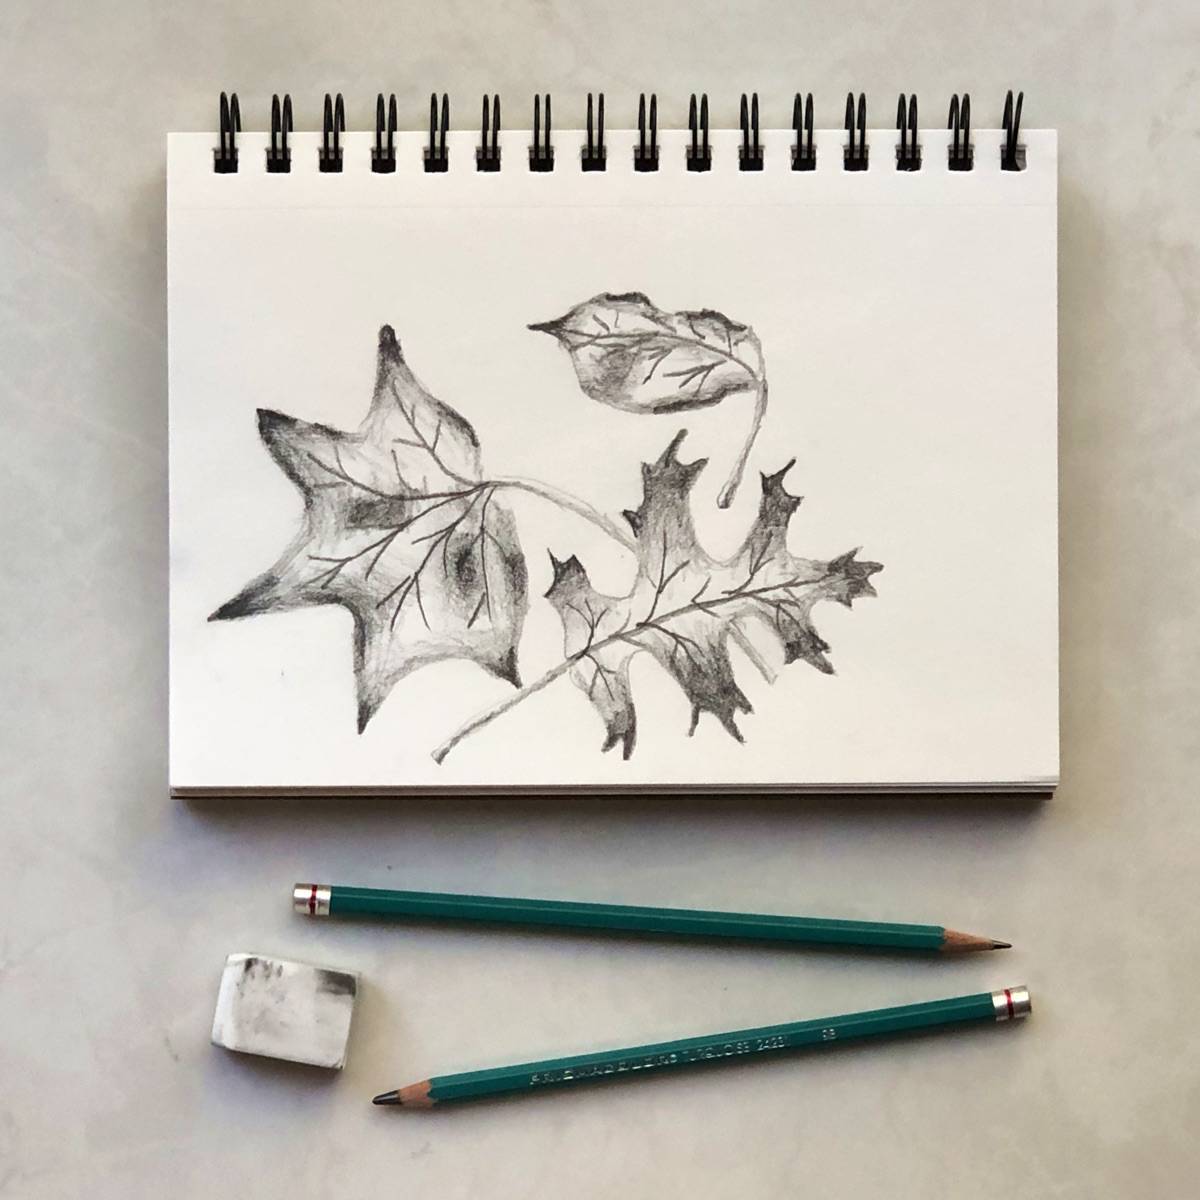 Pencil drawing of fall leaves on a sketch pad with drawing pencils and an eraser.